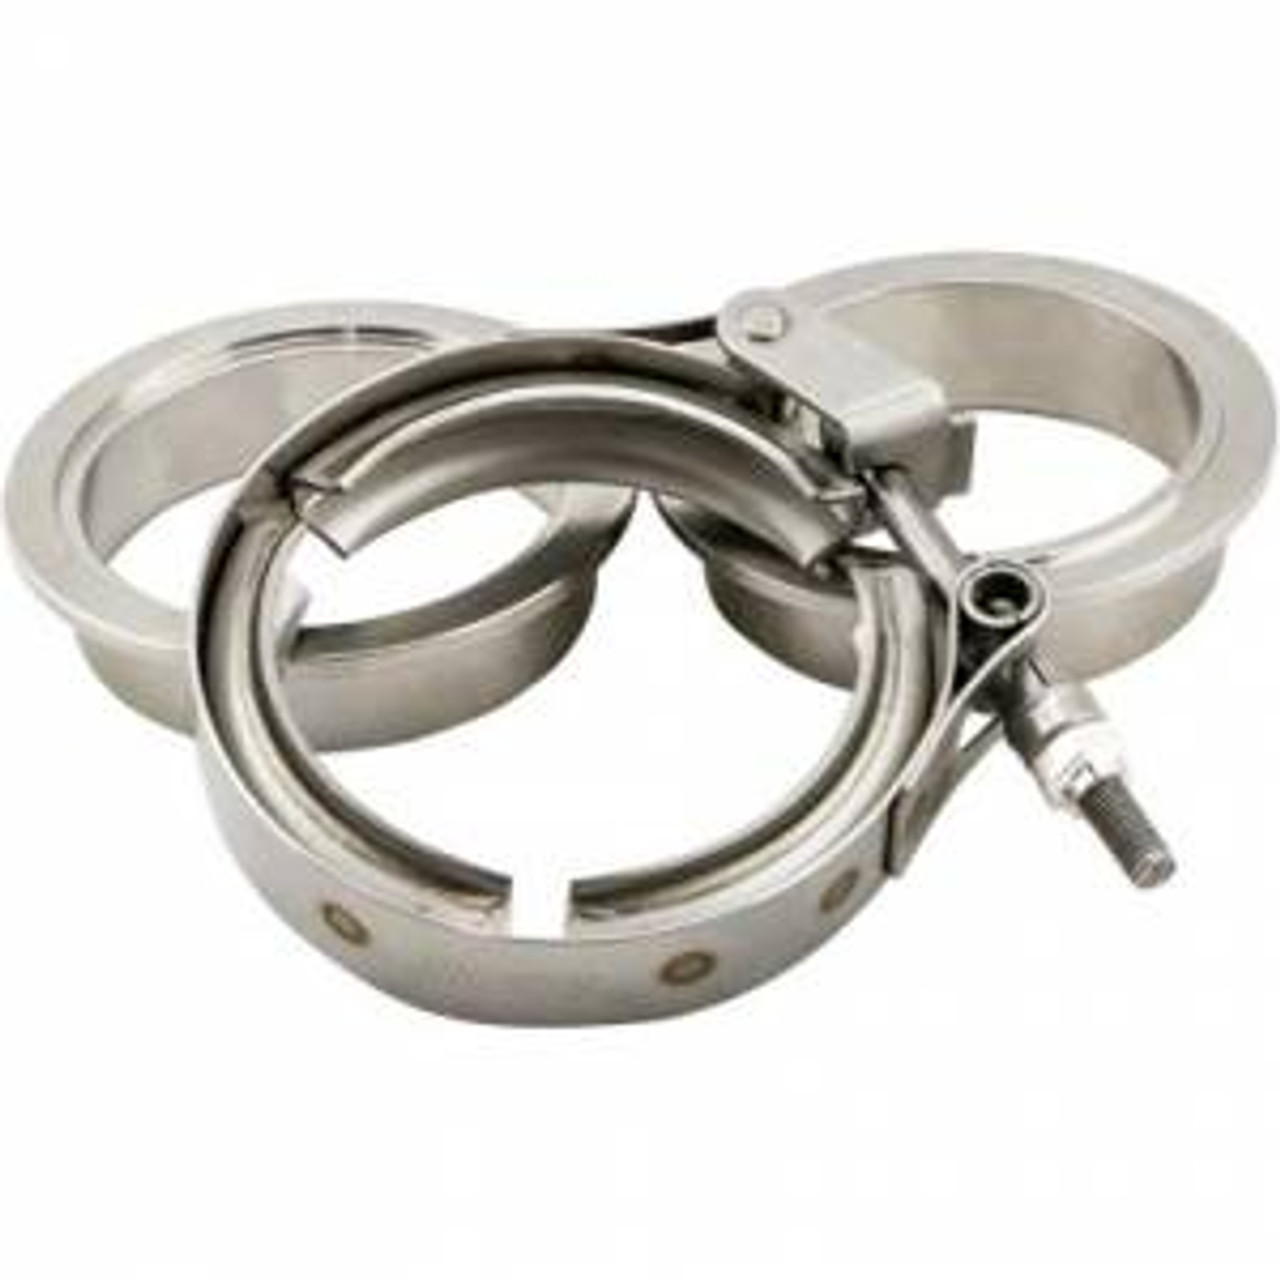 Turbosmart 4" 304 Stainless V Band Clamp with Flange Kit (Universal 4") (TURTS-ECK-400)-Main View